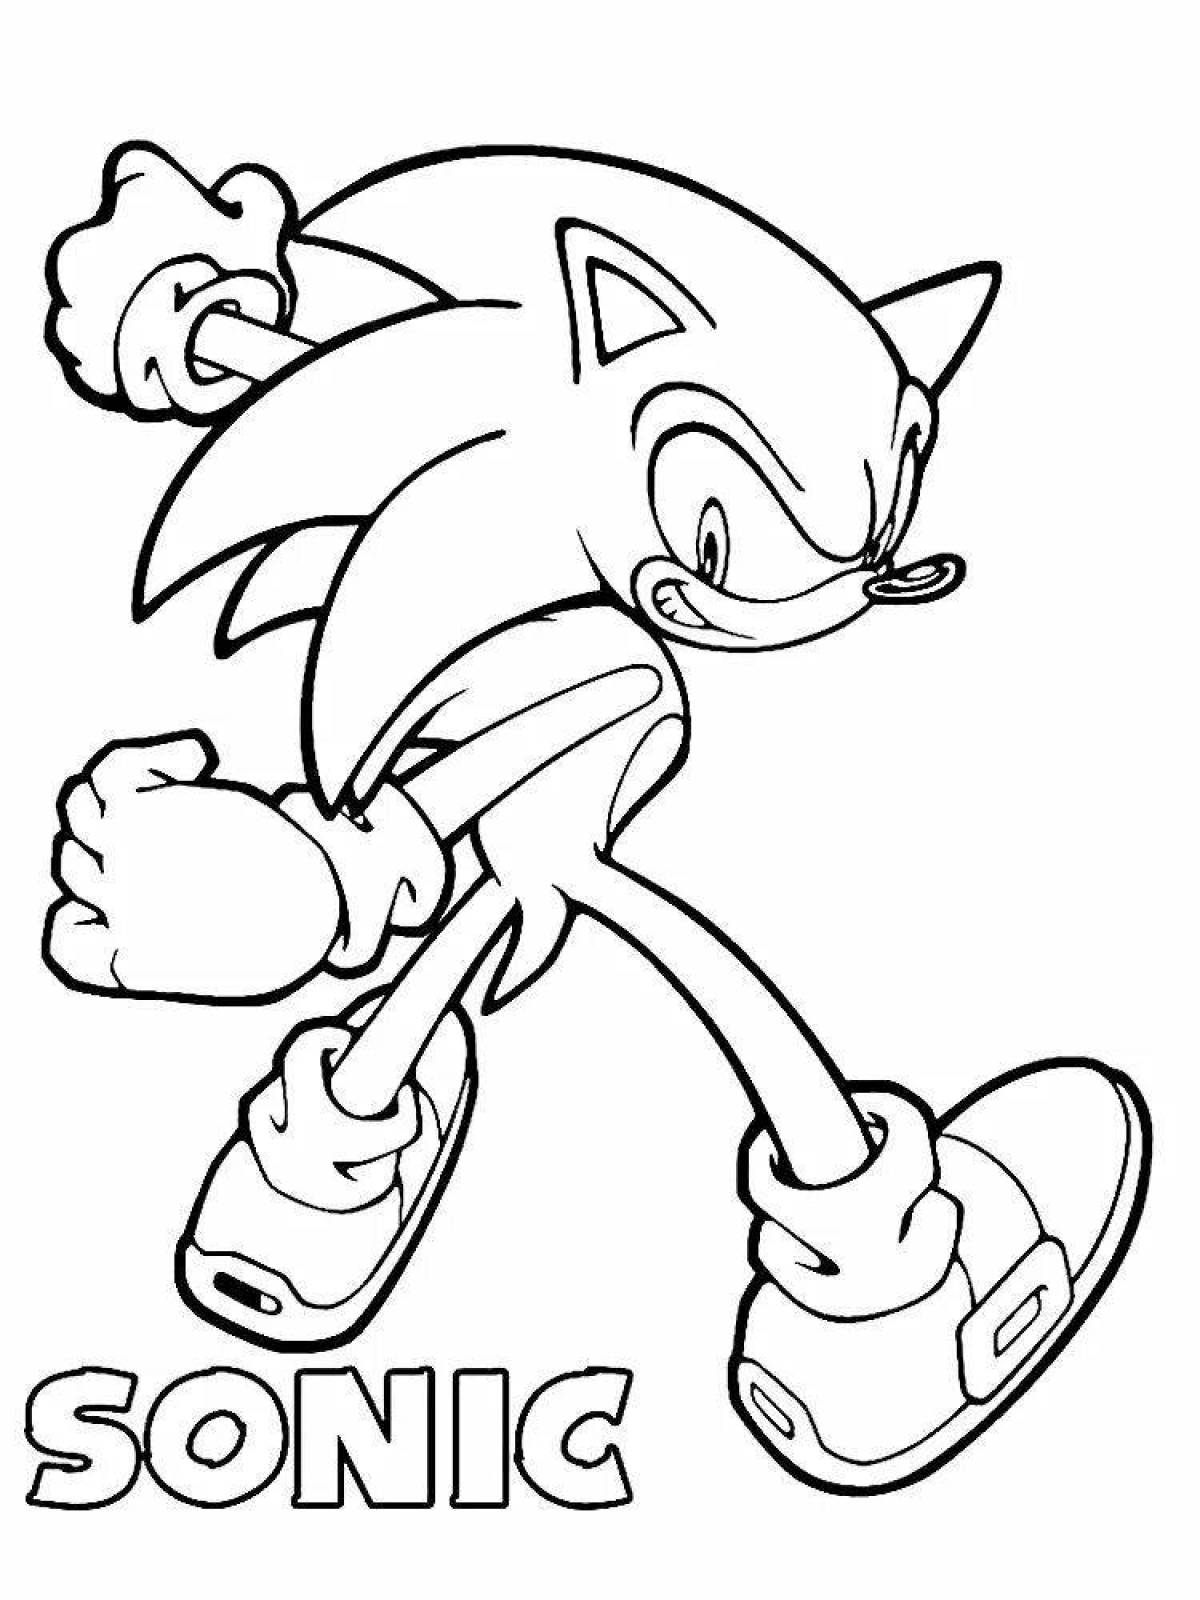 Coloring sweet xs sonic